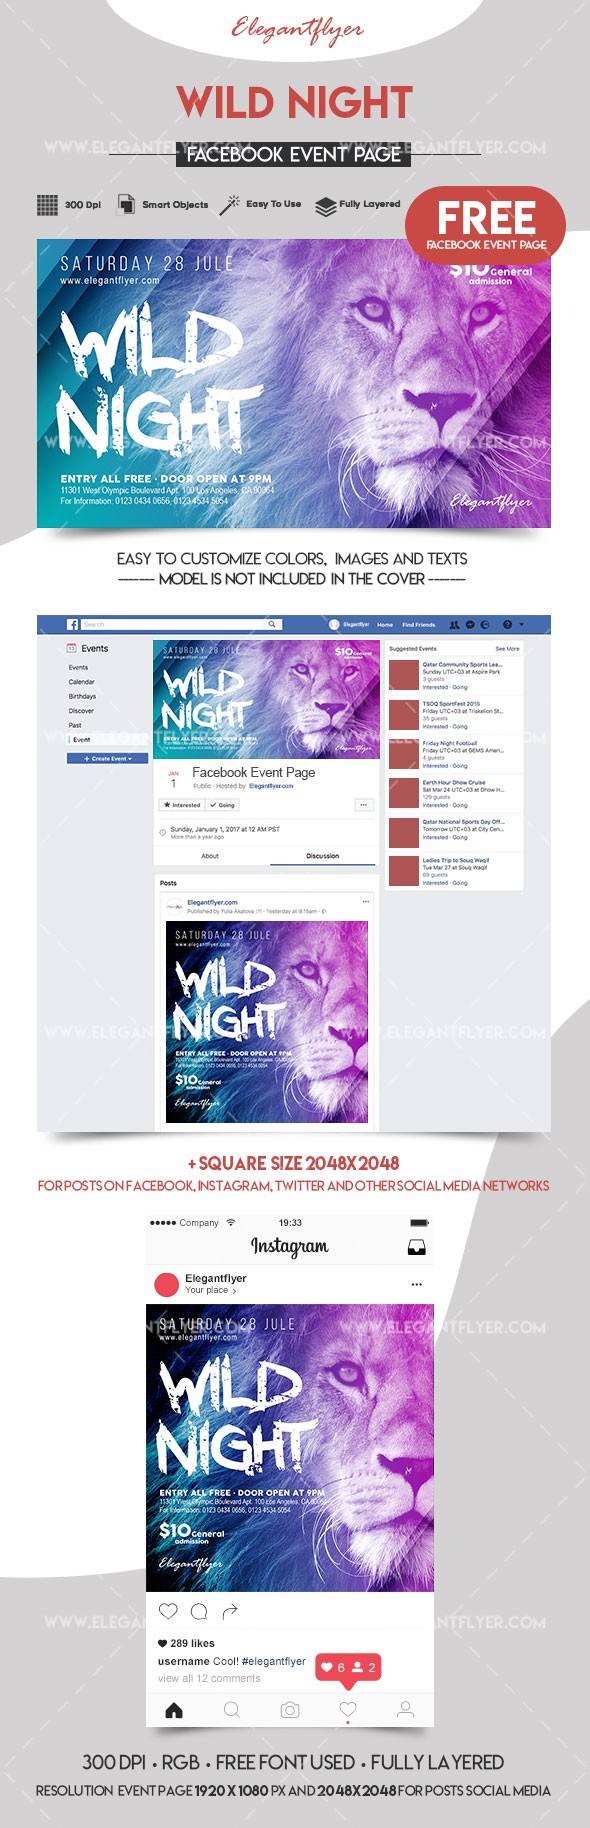 Wild Night Facebook would be translated into French as "Nuit sauvage sur Facebook." by ElegantFlyer